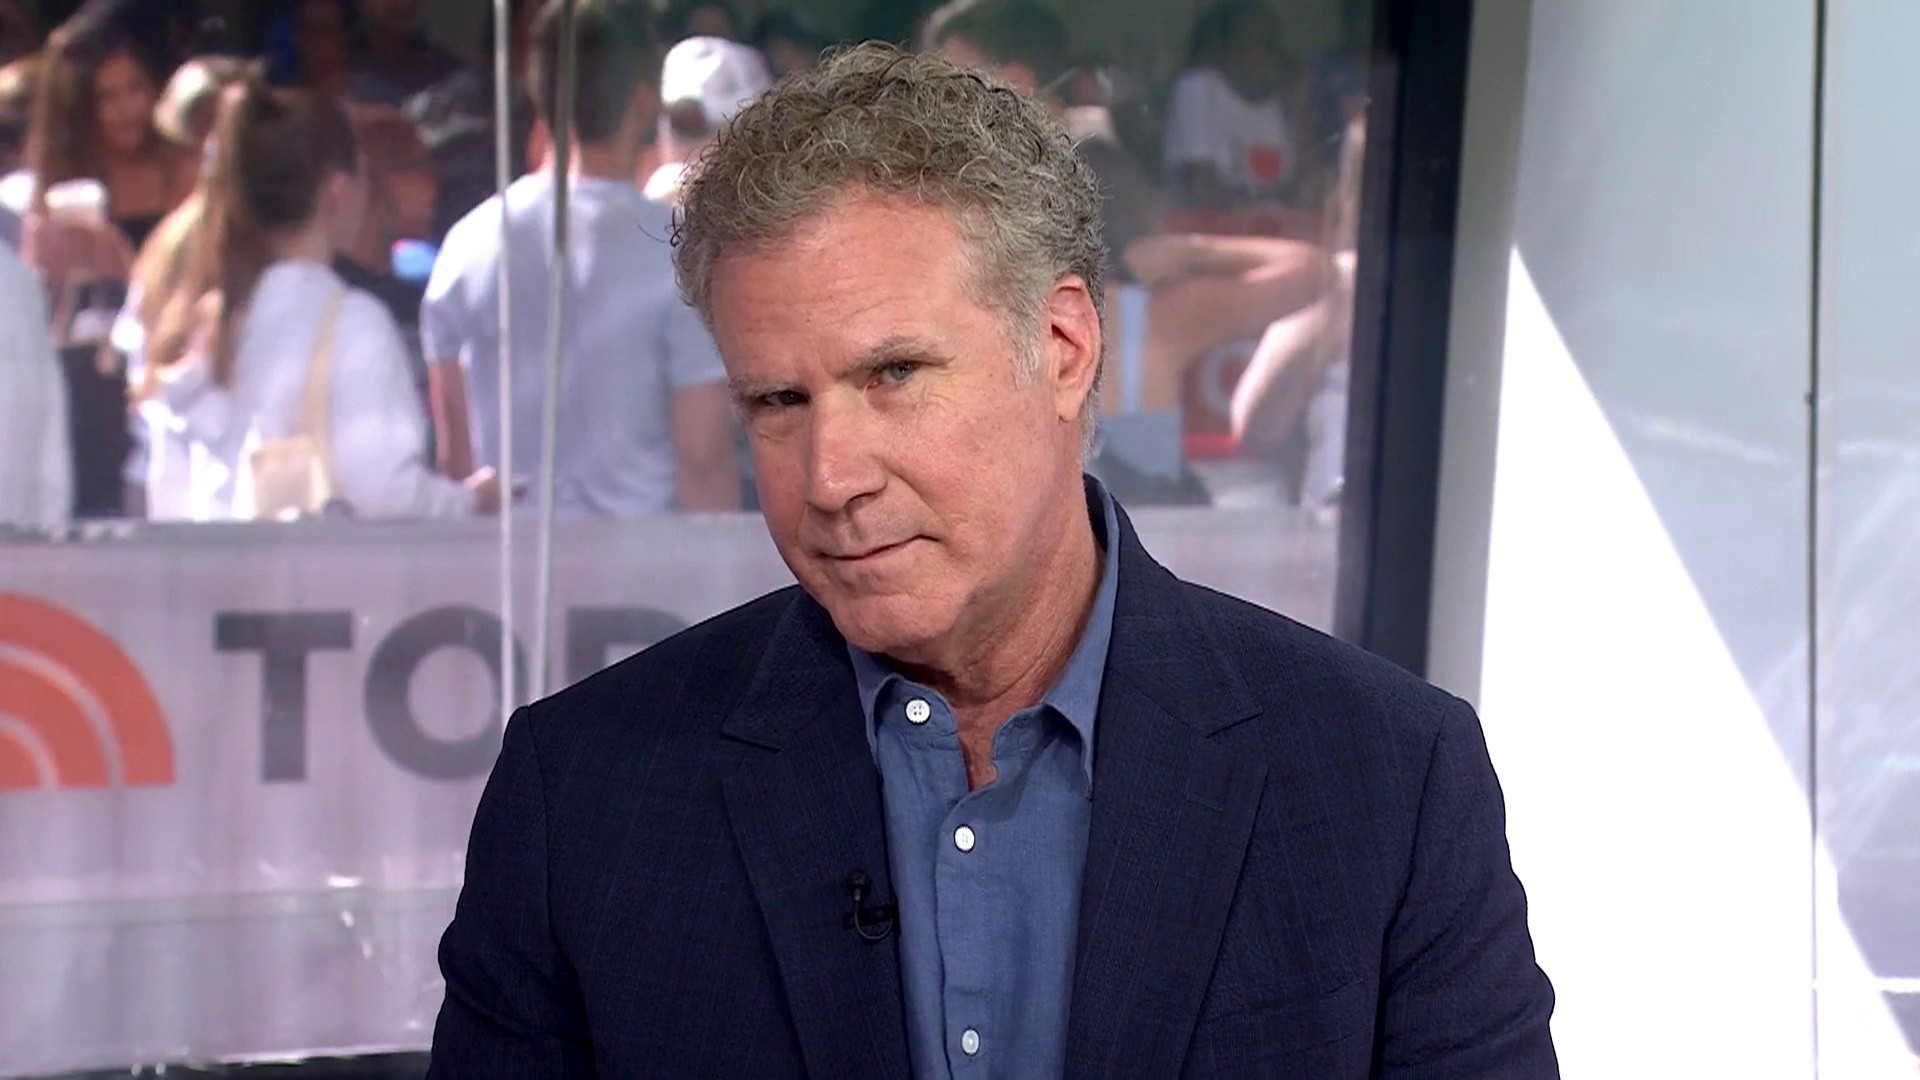 Will Ferrell on 'Despicable Me 4,' dream to be 'Sexiest Man Alive'